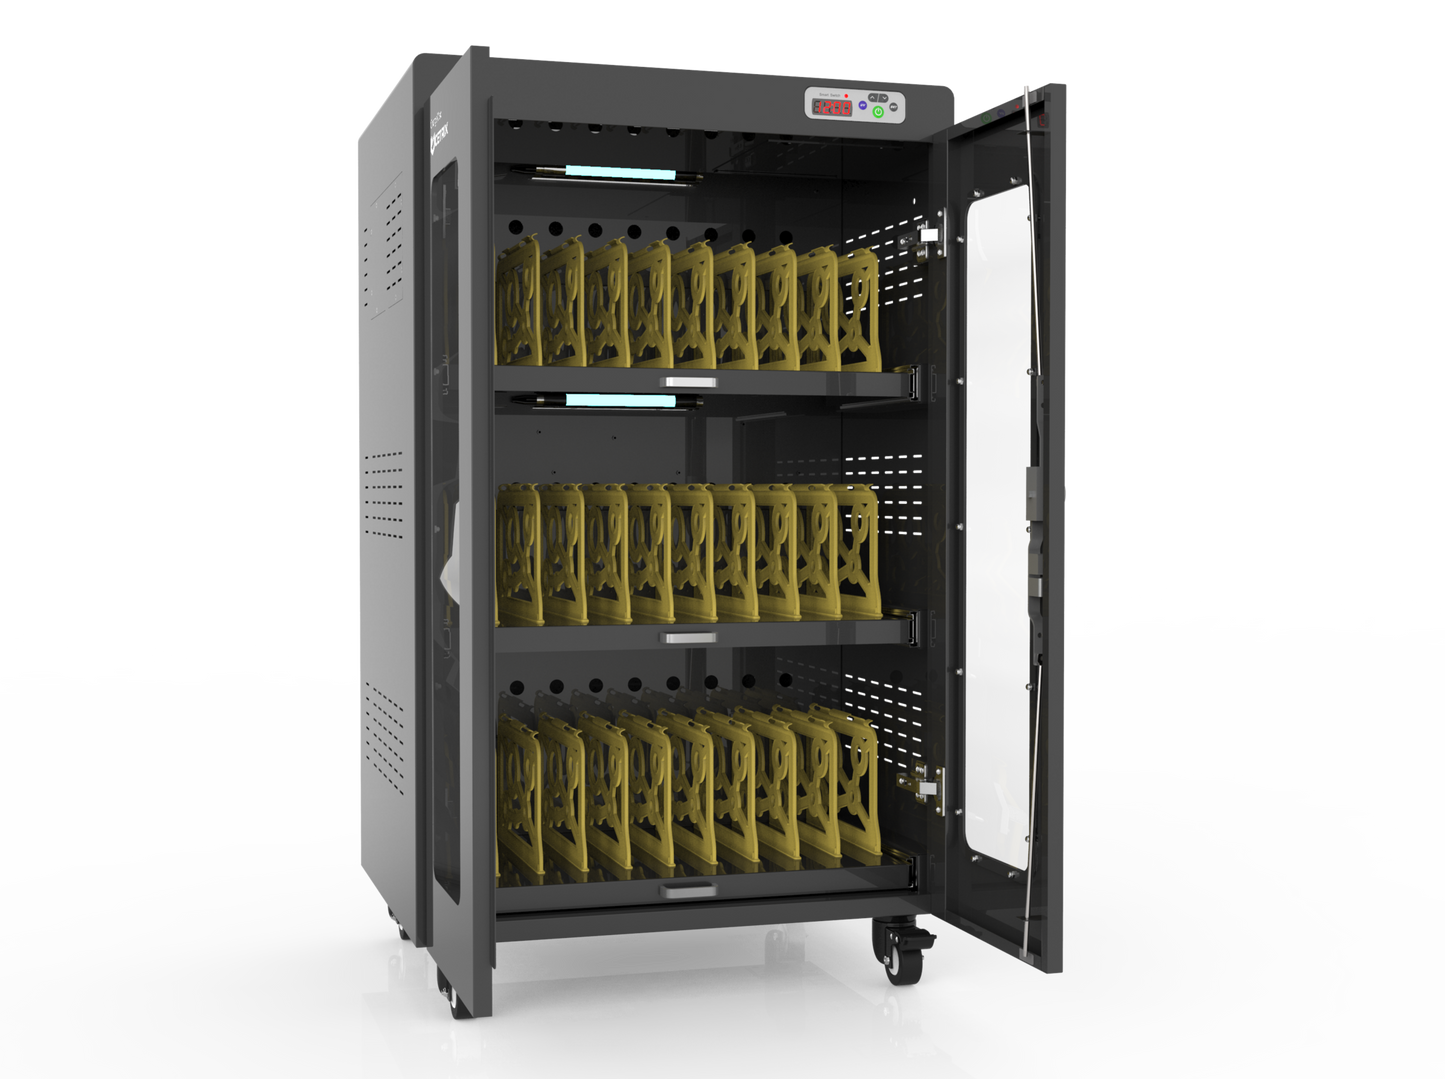 ChargeMax 40-bay Laptop Disinfection Charging Cabinet (CT-40BP) - ChargeMax 40-bay Laptop Disinfection Charging Cabinet (CT-40BP). Safe and High Capacity - ChargeMax comes in different sizes for charging